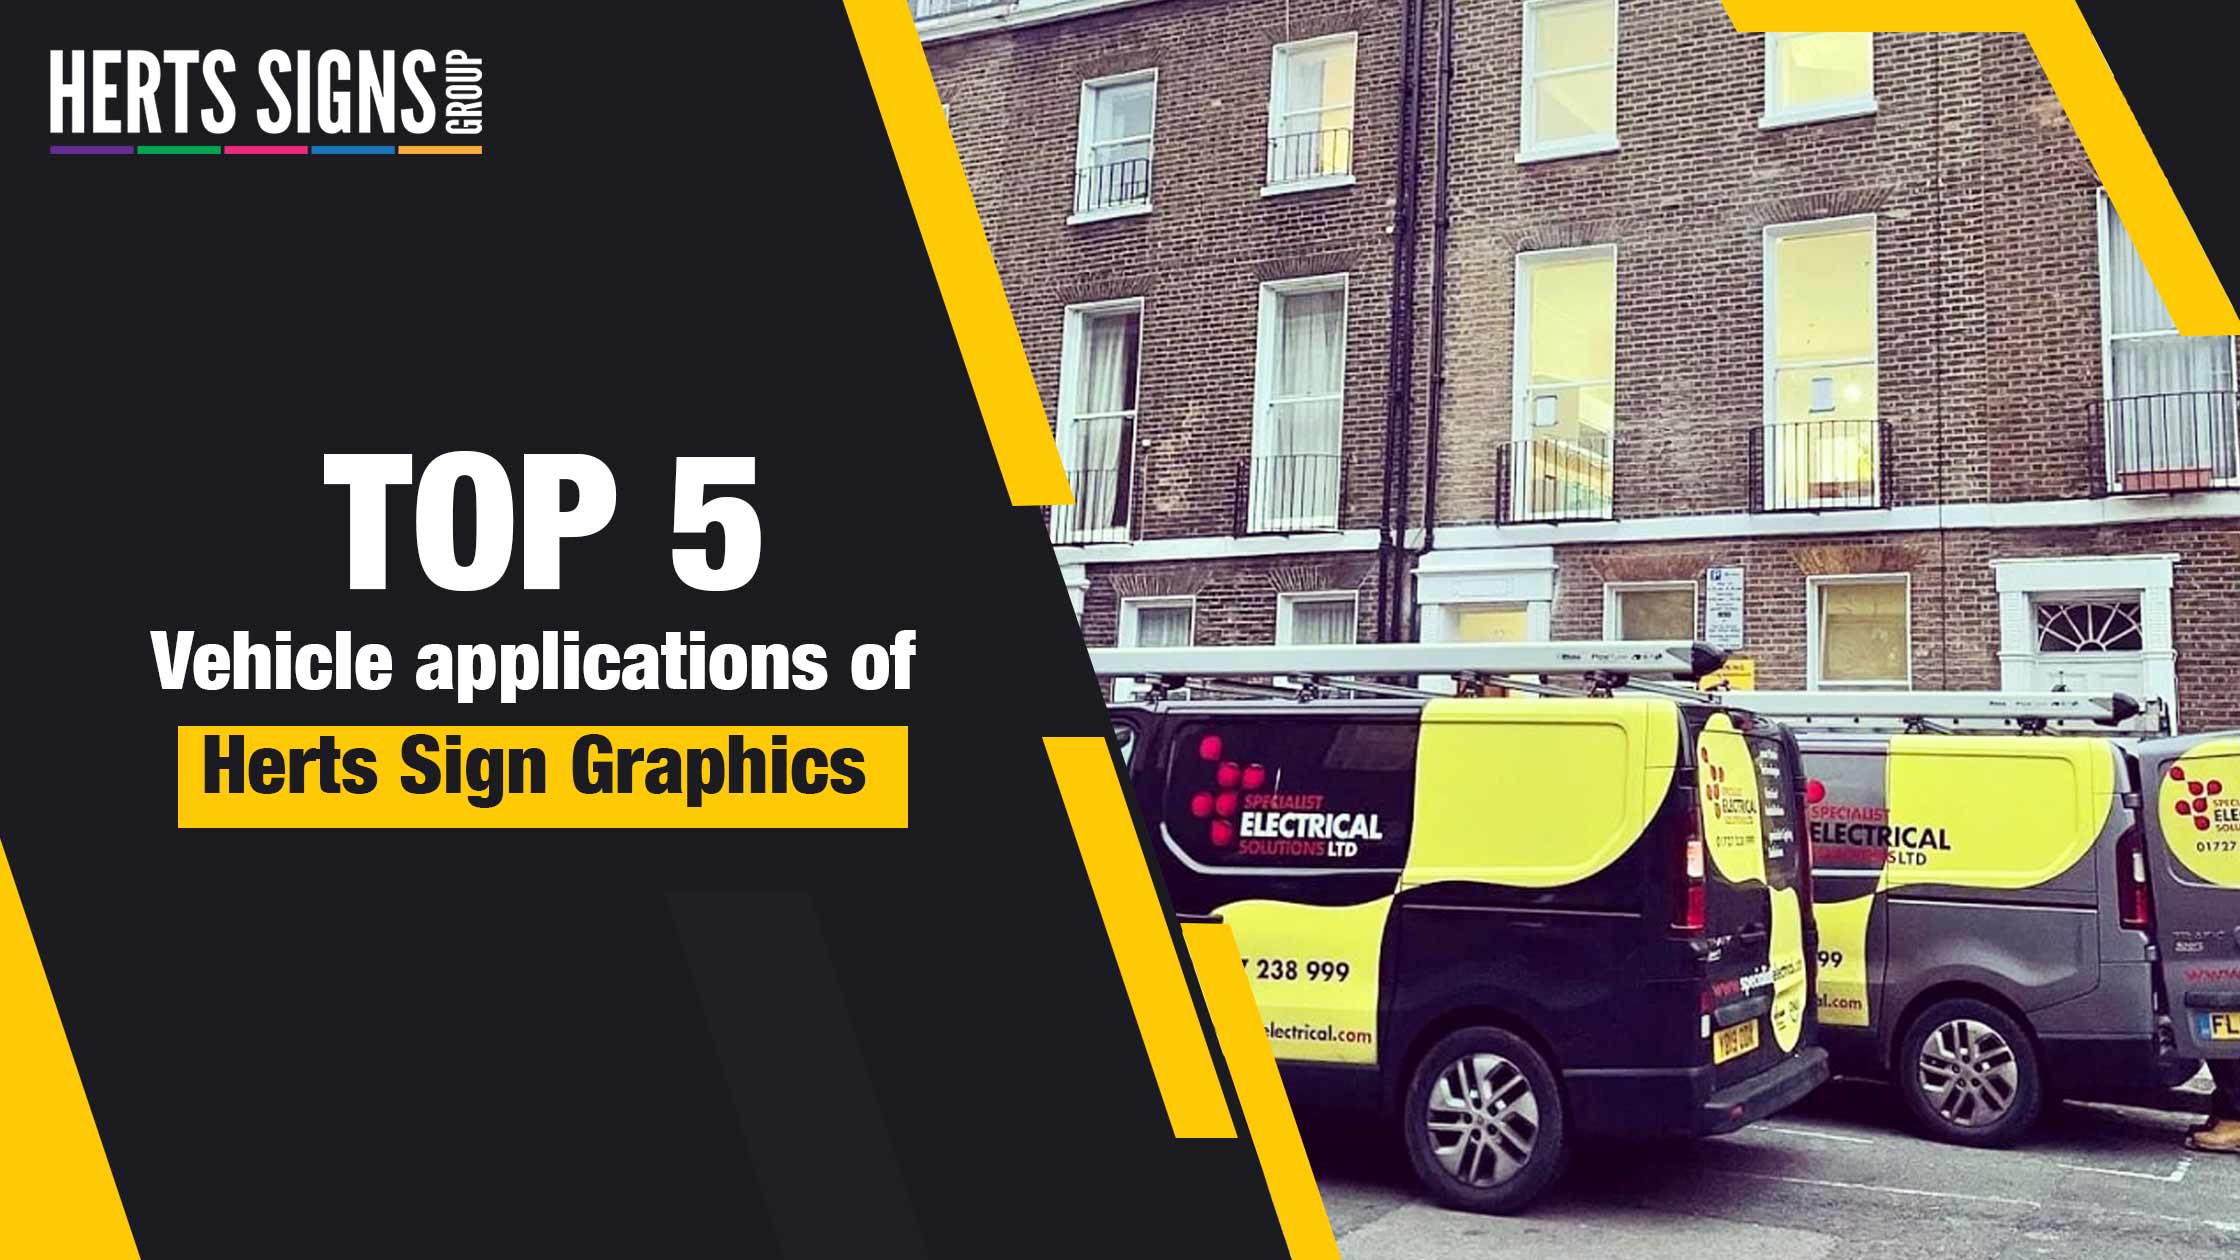 Top 5 Vehicle applications of Herts Sign Graphics